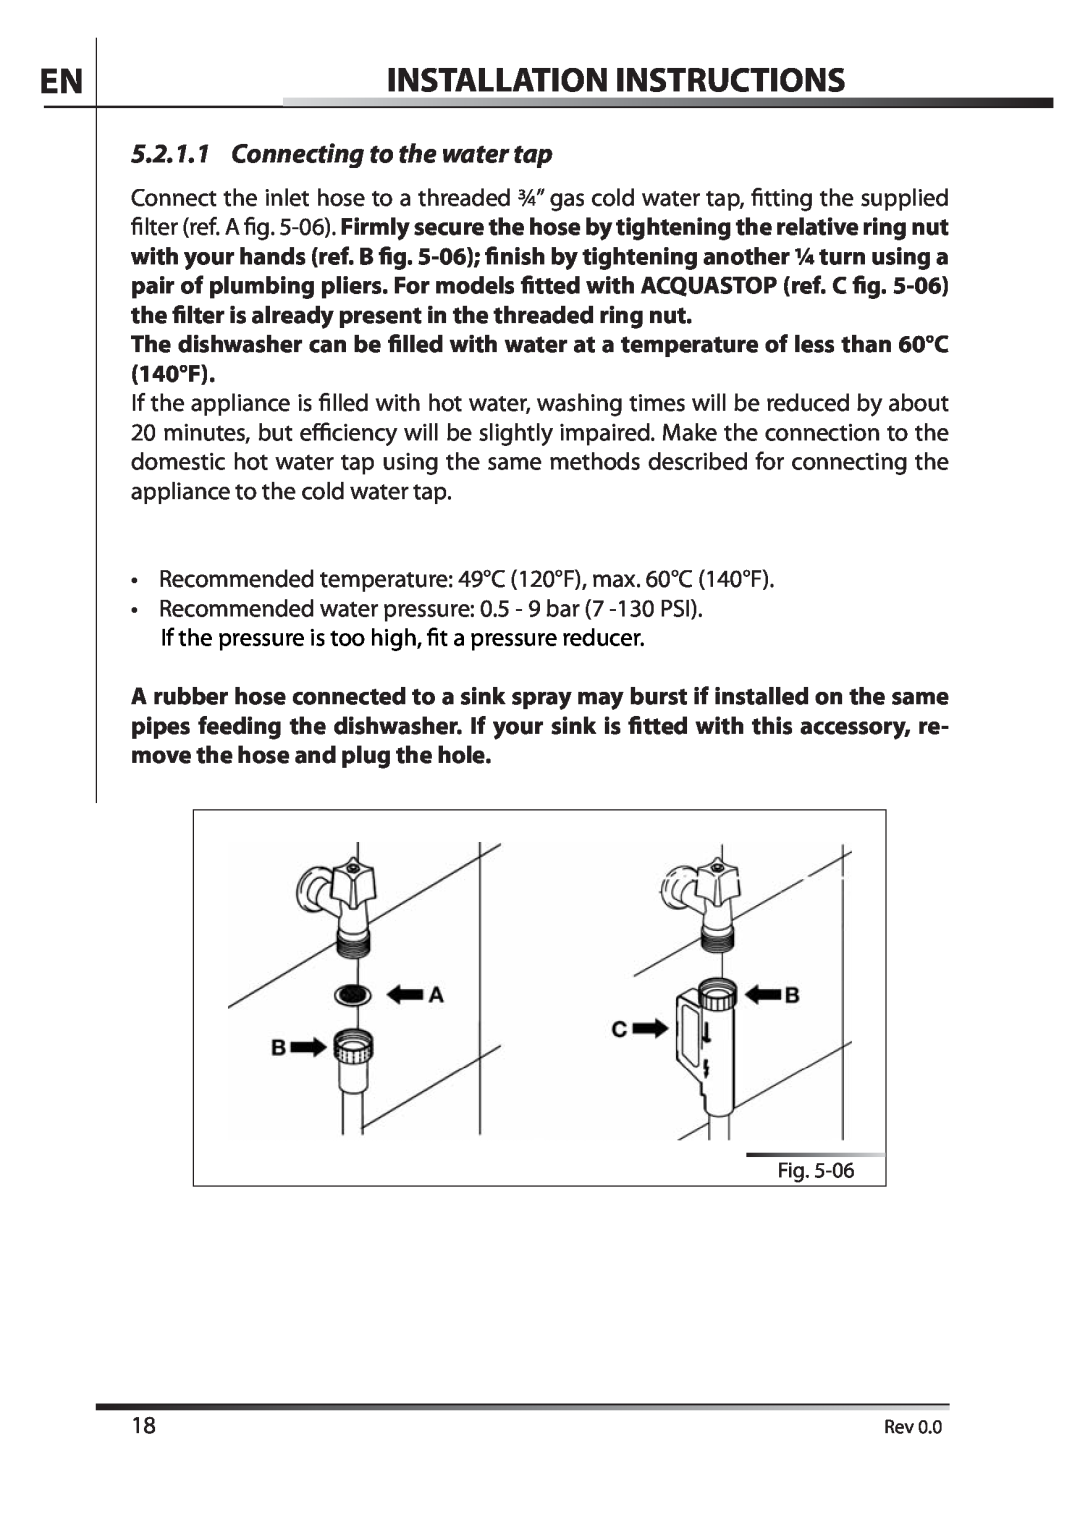 AEG F89078VI-M Installation Instructions, Connecting to the water tap, Recommended temperature 49C 120F, max. 60C 140F 